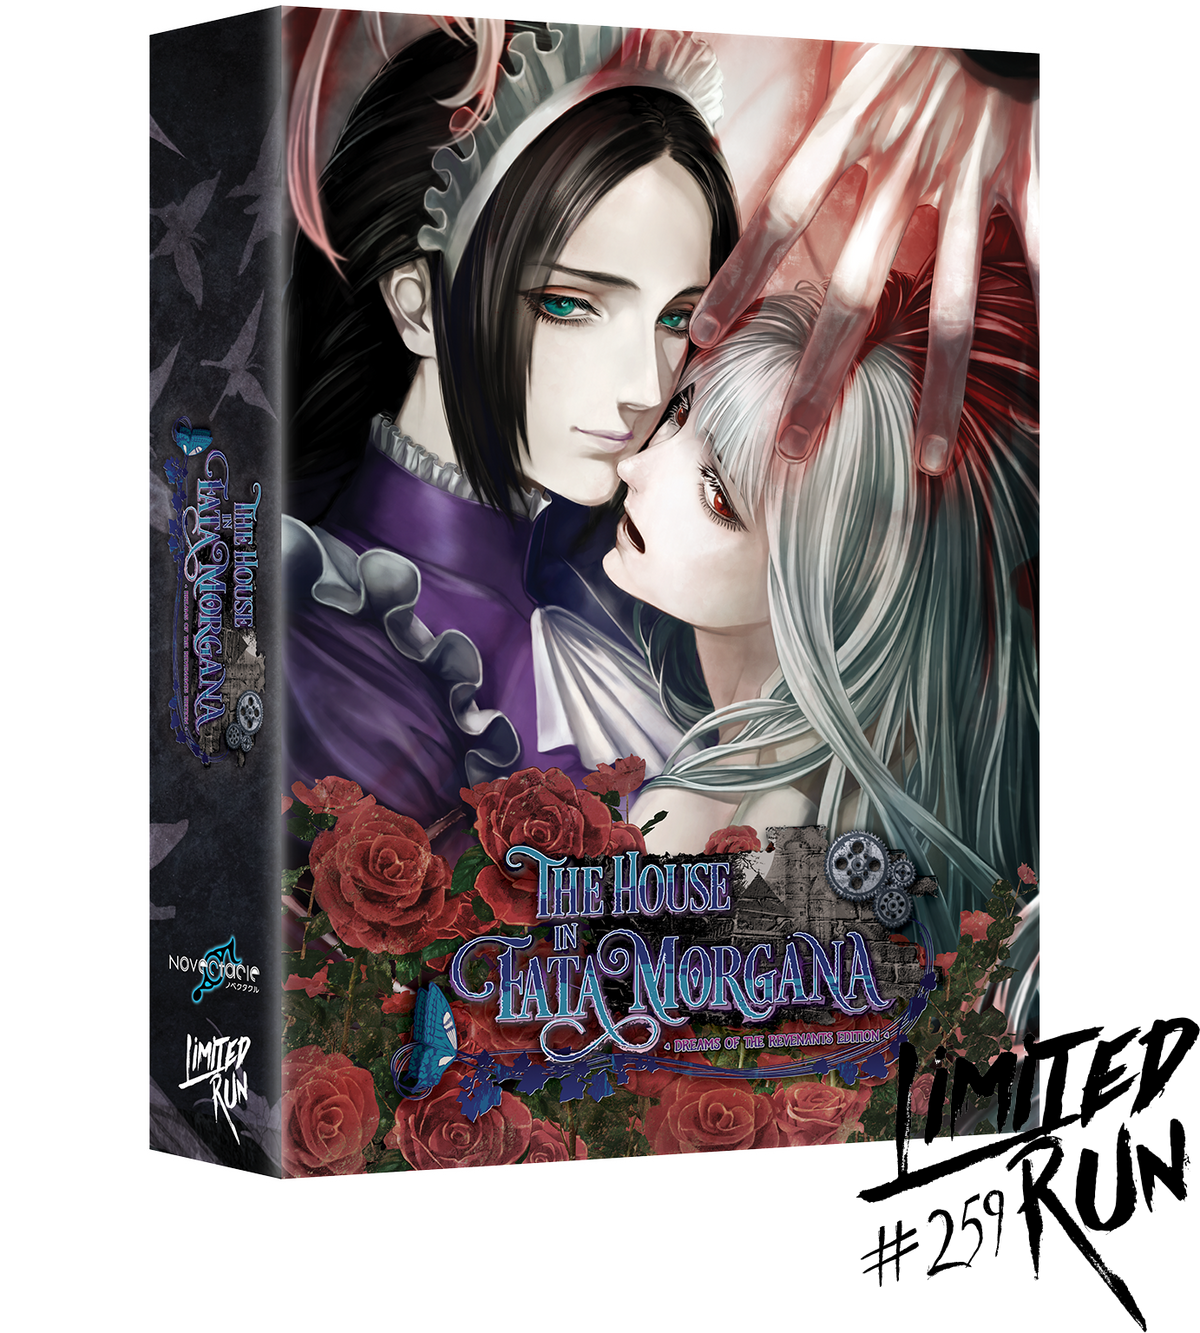 Limited Run #259: The House in Fata Morgana Collector's Edition (PS4)